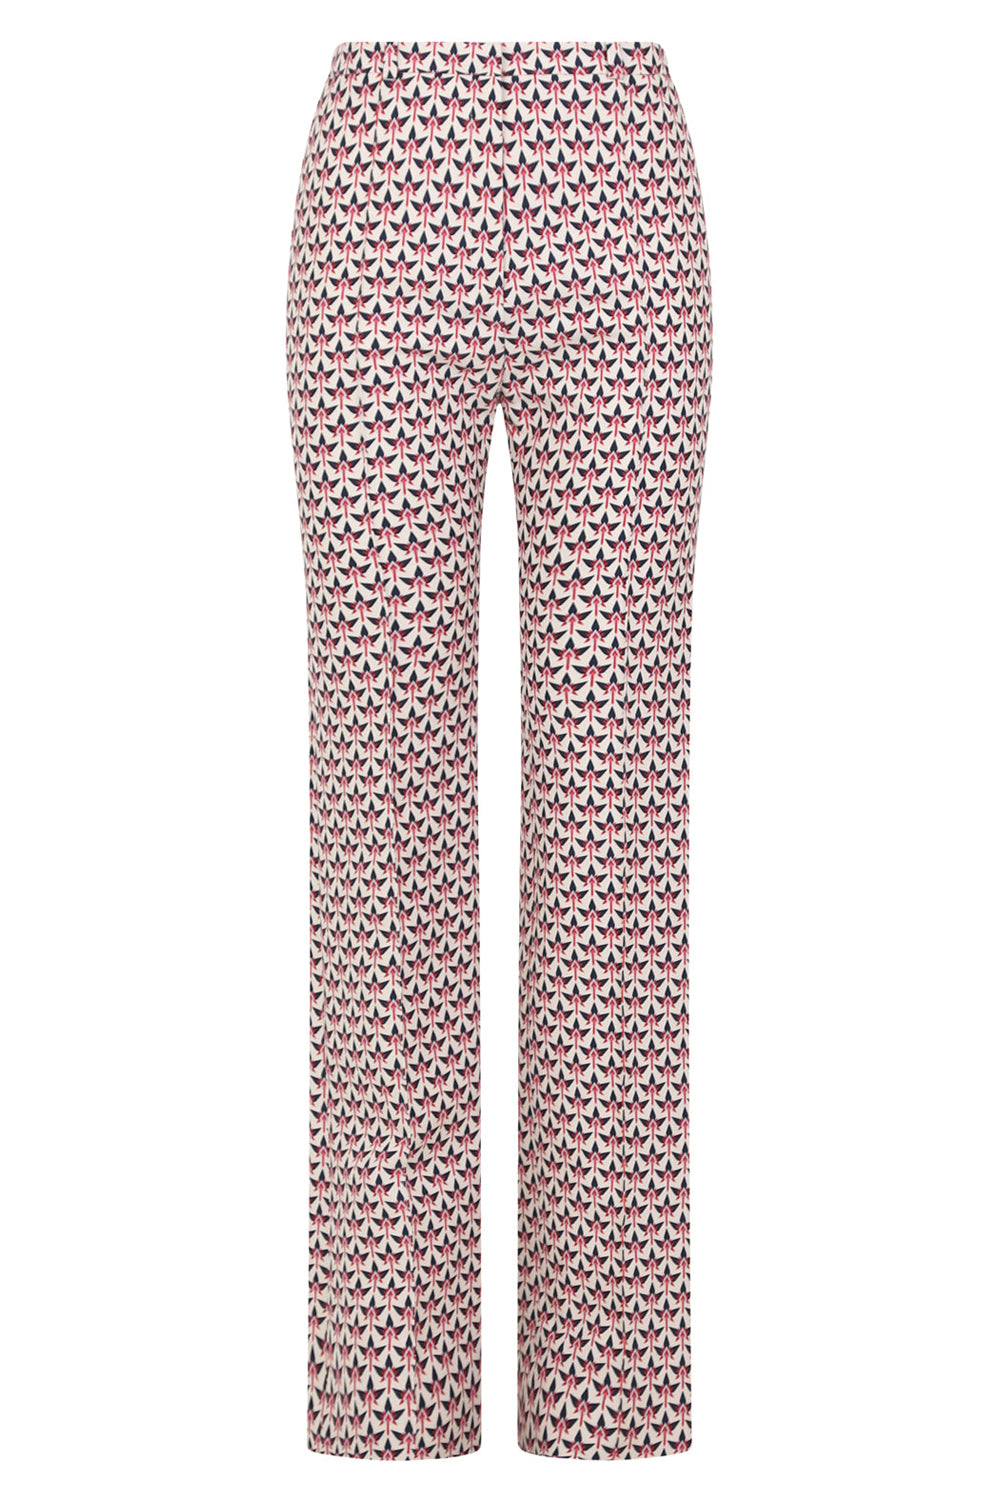 PACO RABANNE PANTS 70'S PRINT TAILORED PANT OFF WHITE